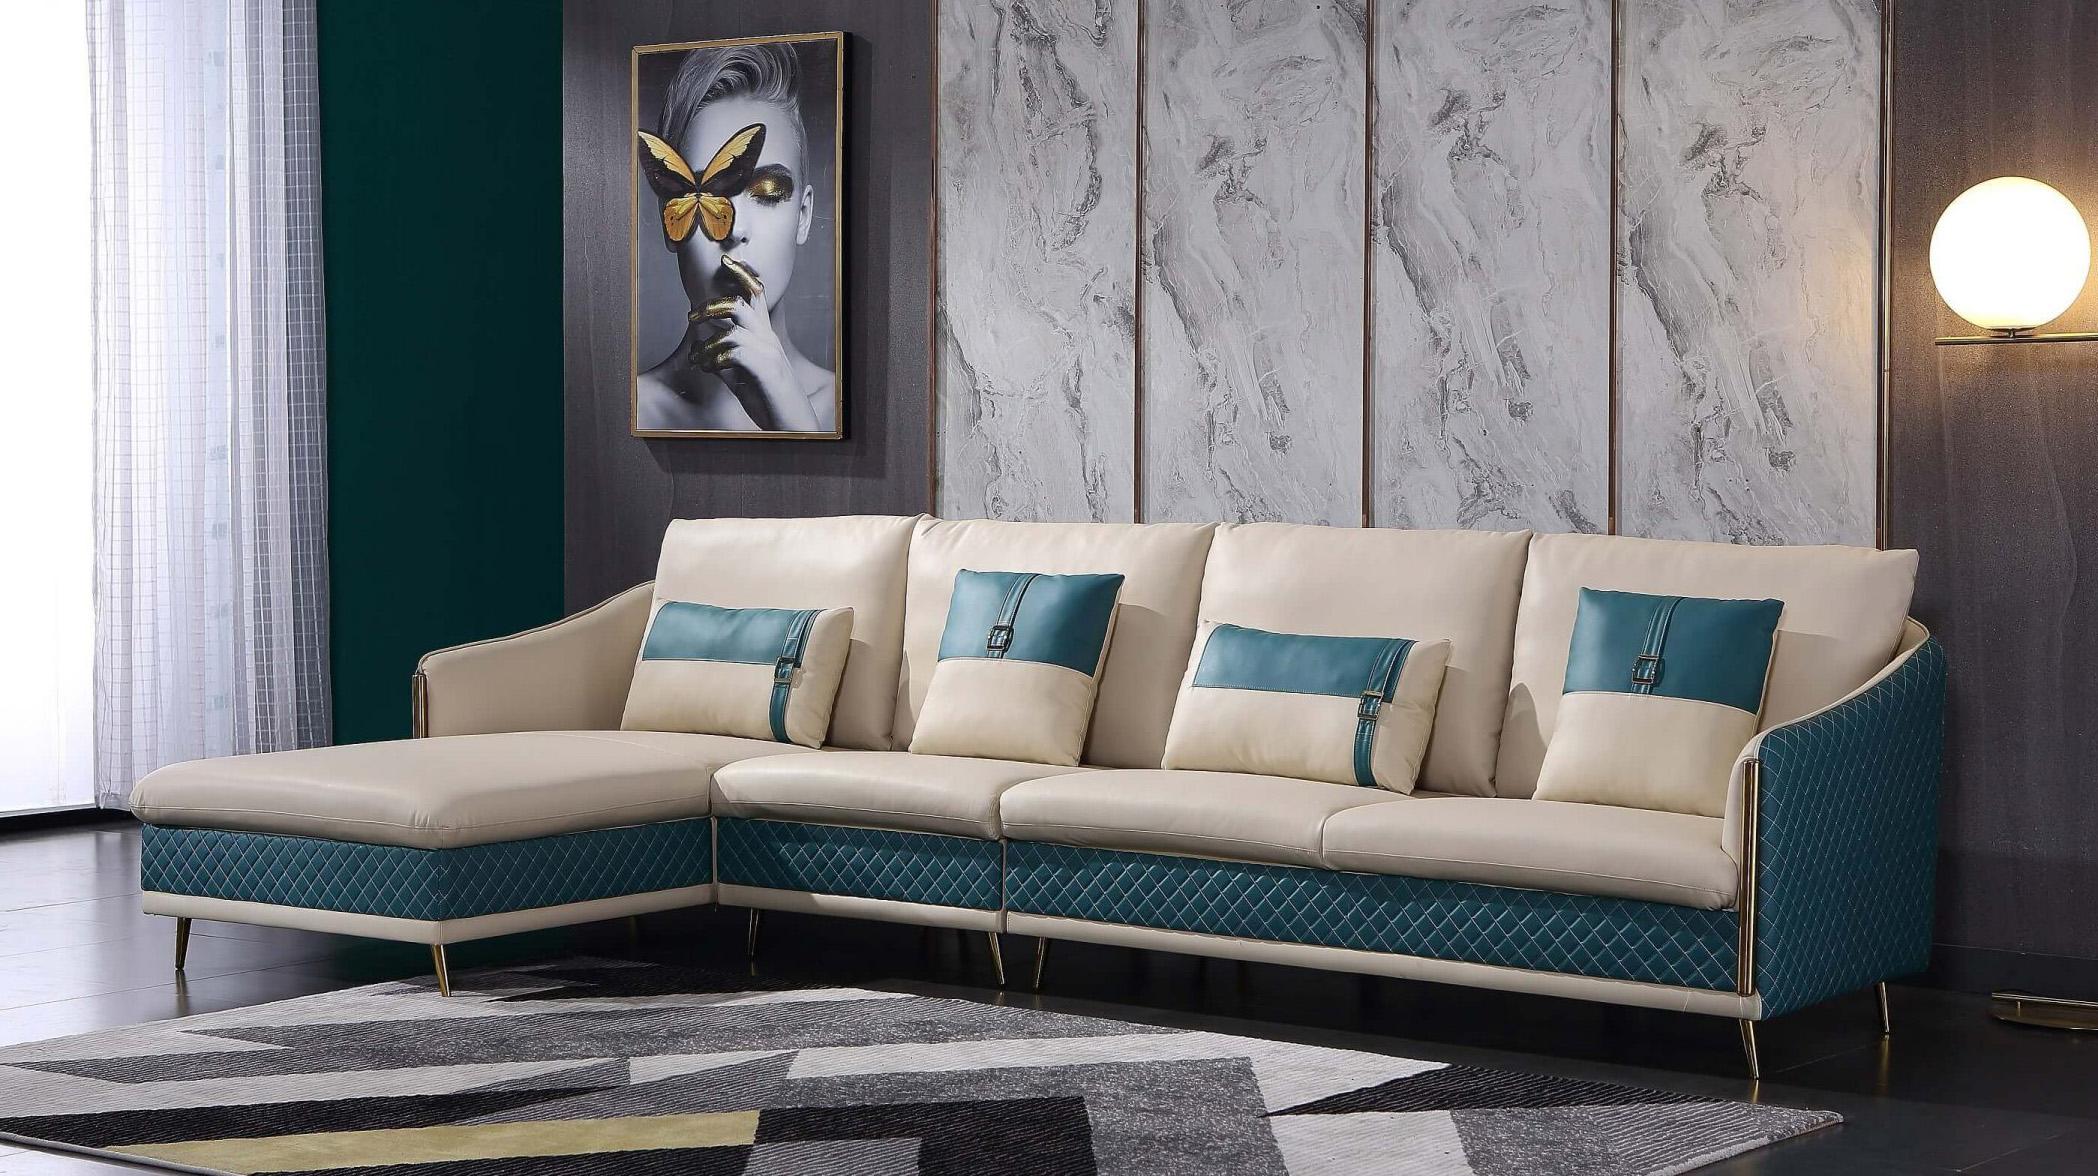 

    
Off White & Blue Leather 4-Seater Sectional LHC ICARO EUROPEAN FURNITURE
